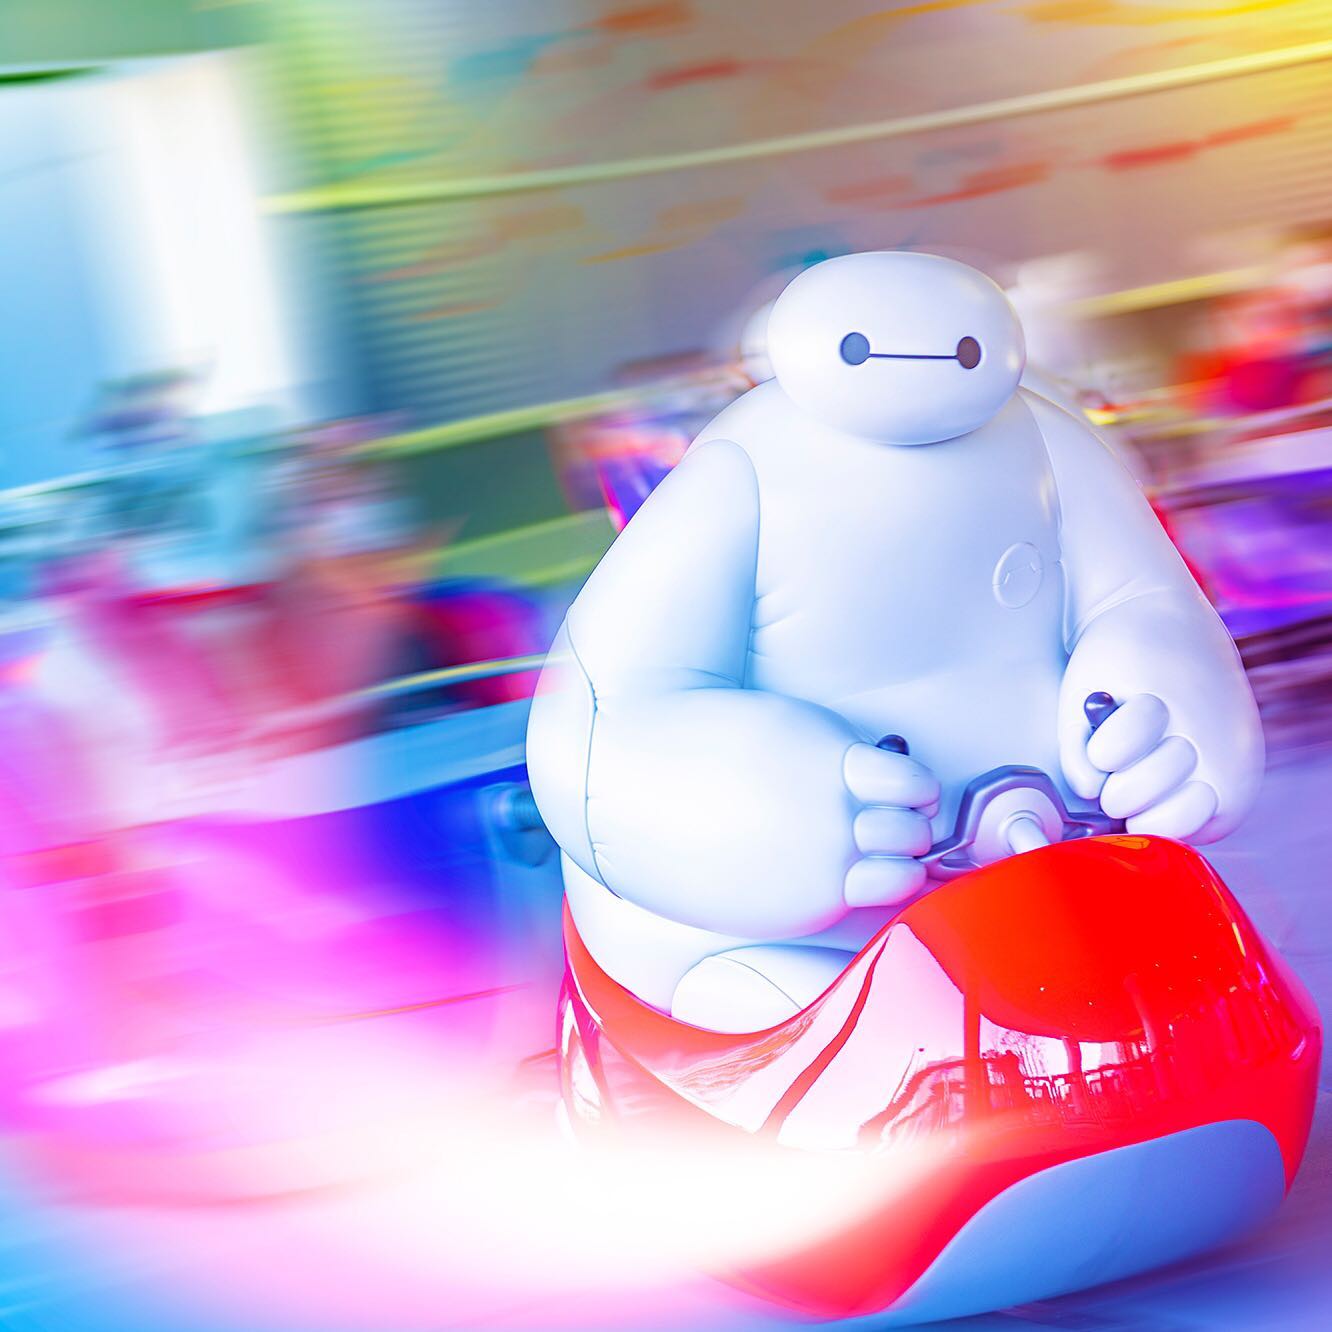 Filled with happiness✨
今日もハピネスを乗せて♪
#thehappyridewithbaymax #tomorrowland...のイメージ